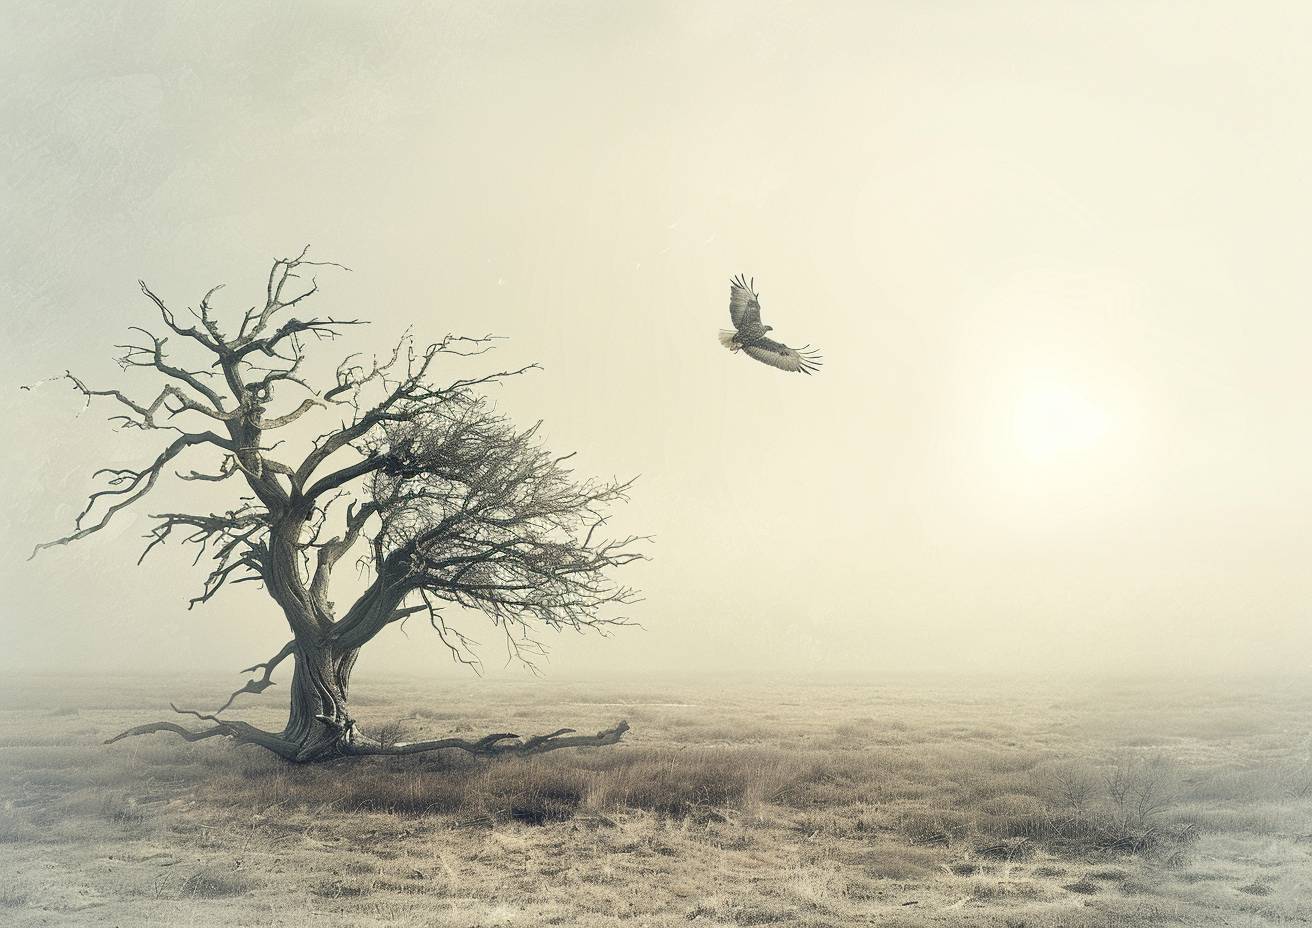 Minimalist landscape, a hawk launches itself from a dead tree, wings strobing in the sunlight, Apocalypsecore